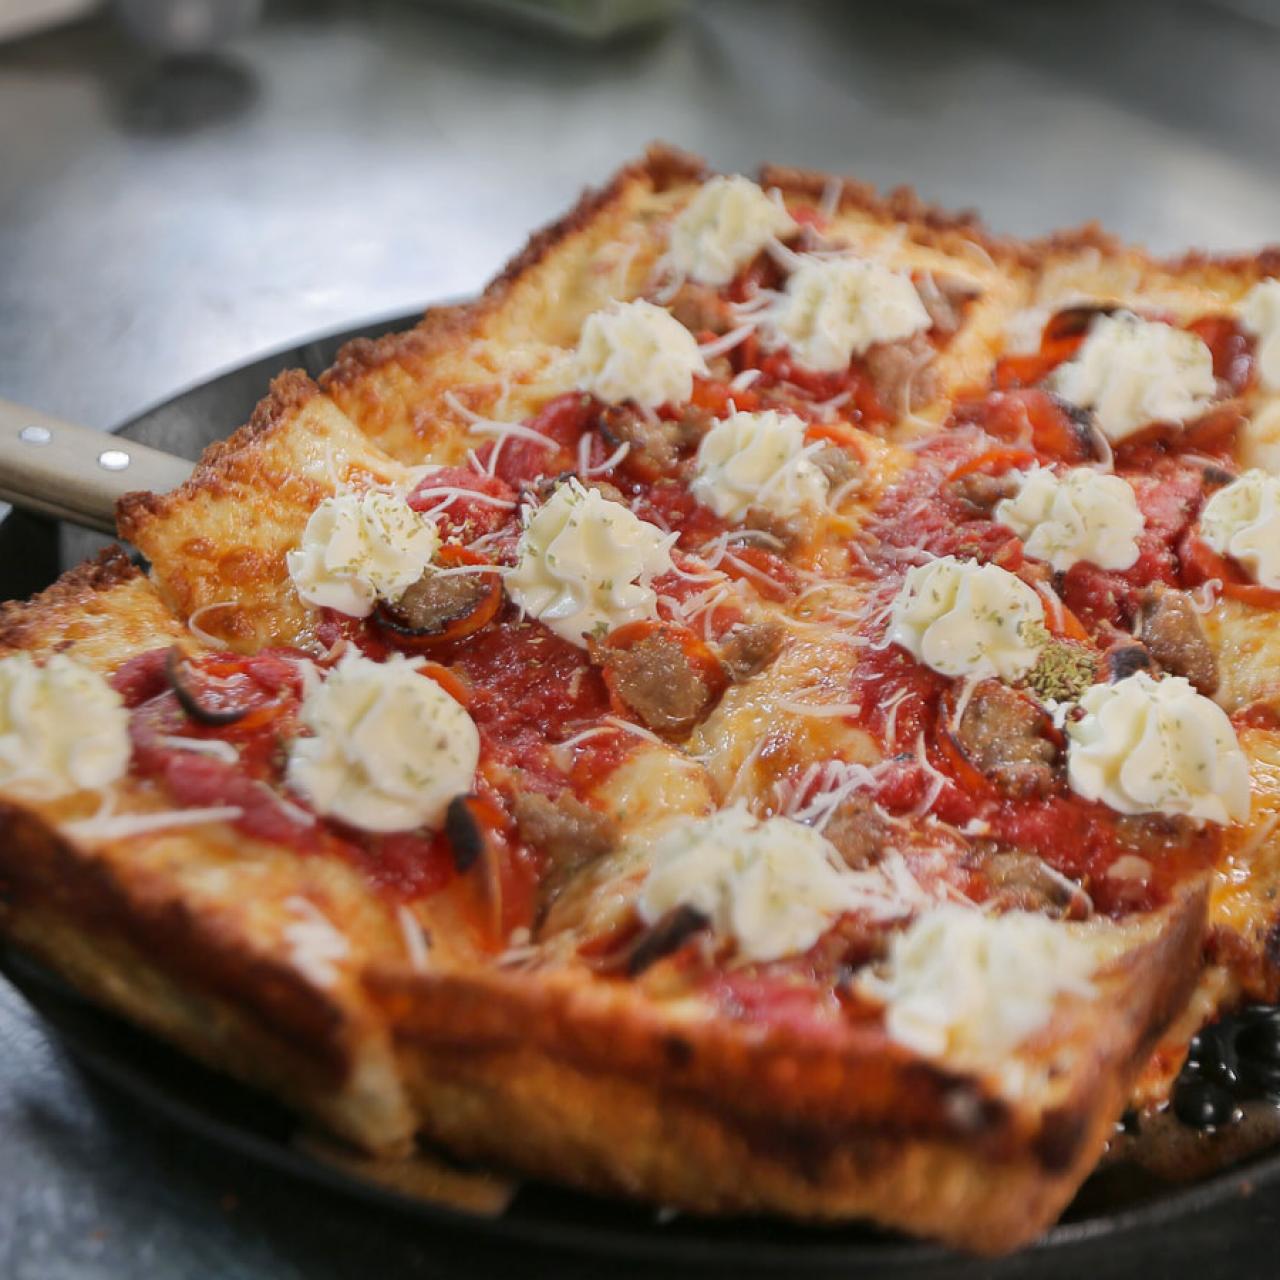 The Specialized Pan That Gives Detroit-Style Pizza Its Signature